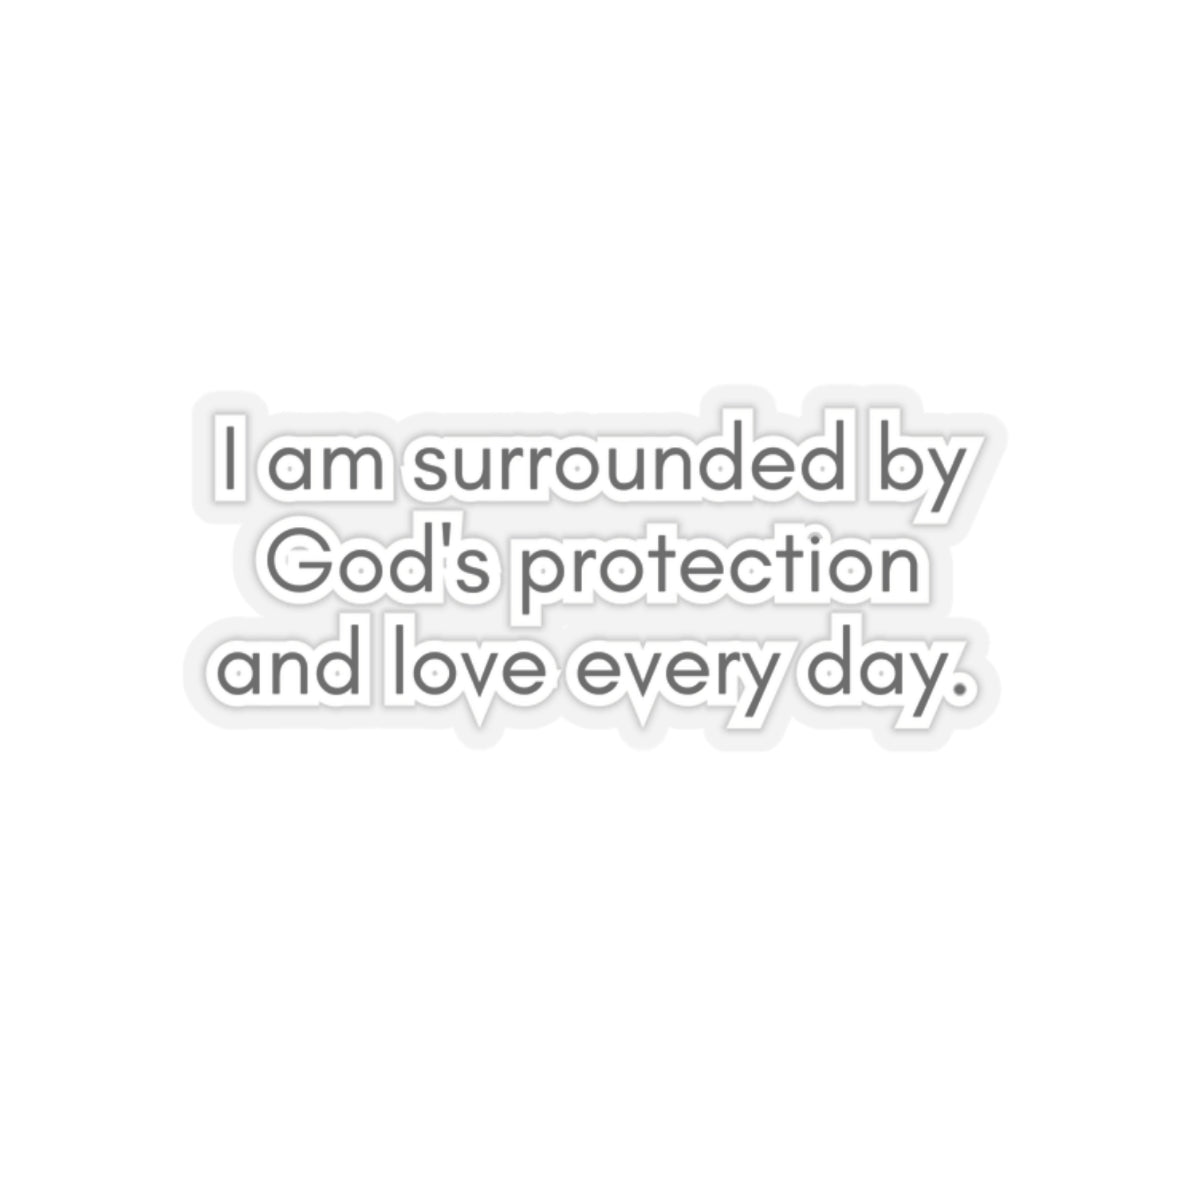 Surrounded By God's Protection Inspirational Quote Kiss-Cut Stickers-Paper products-2" × 2"-Transparent-mysticalcherry